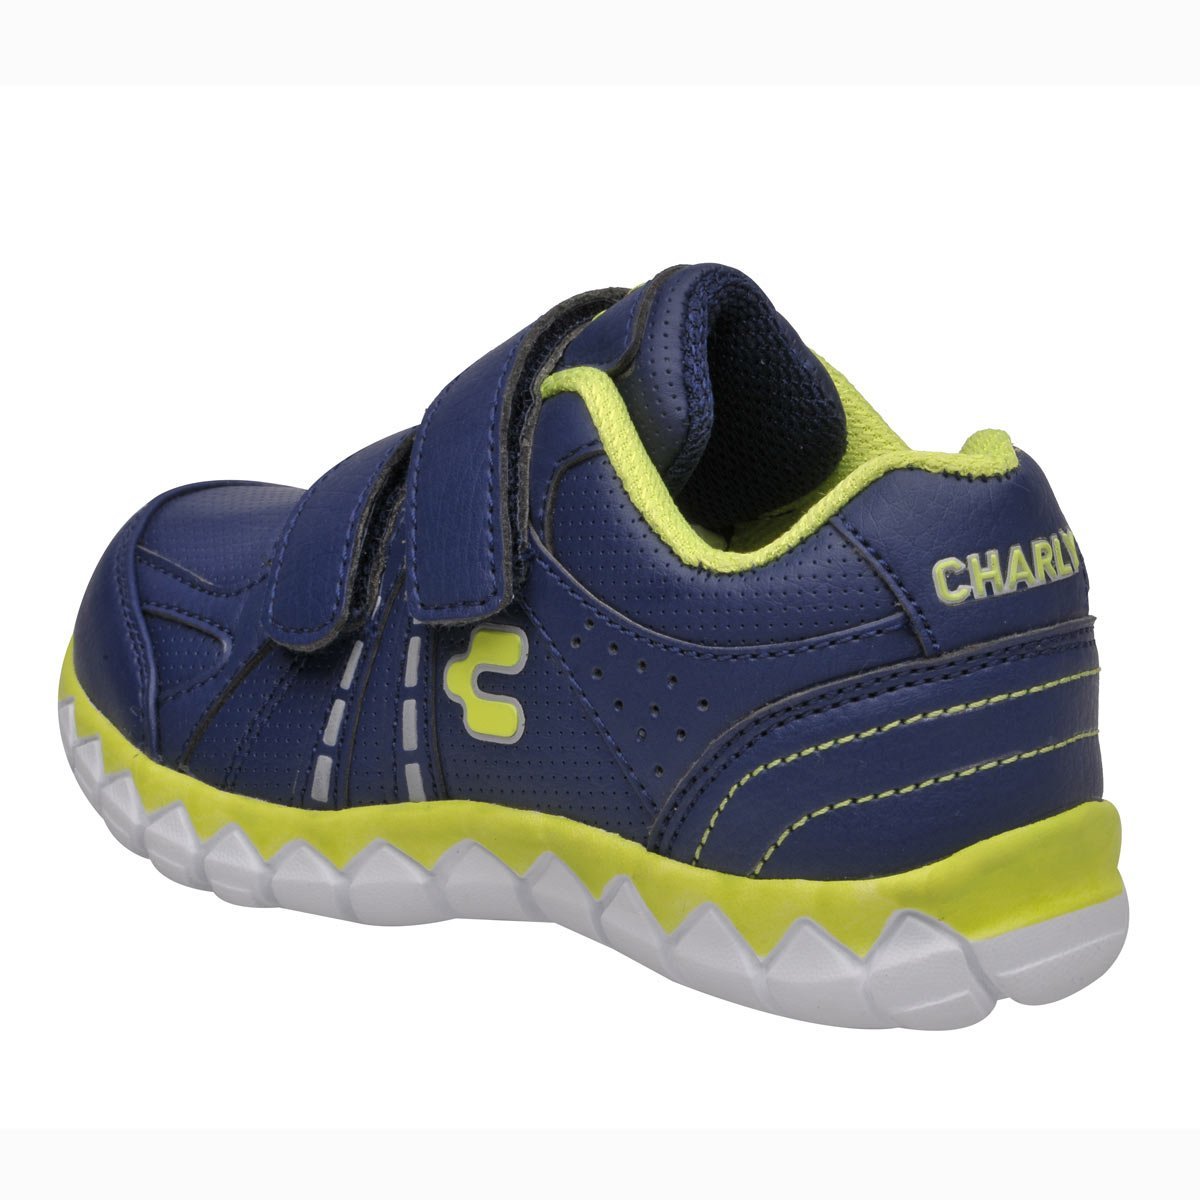 Tenis Choclo Casual 15-21 Charly 1061540